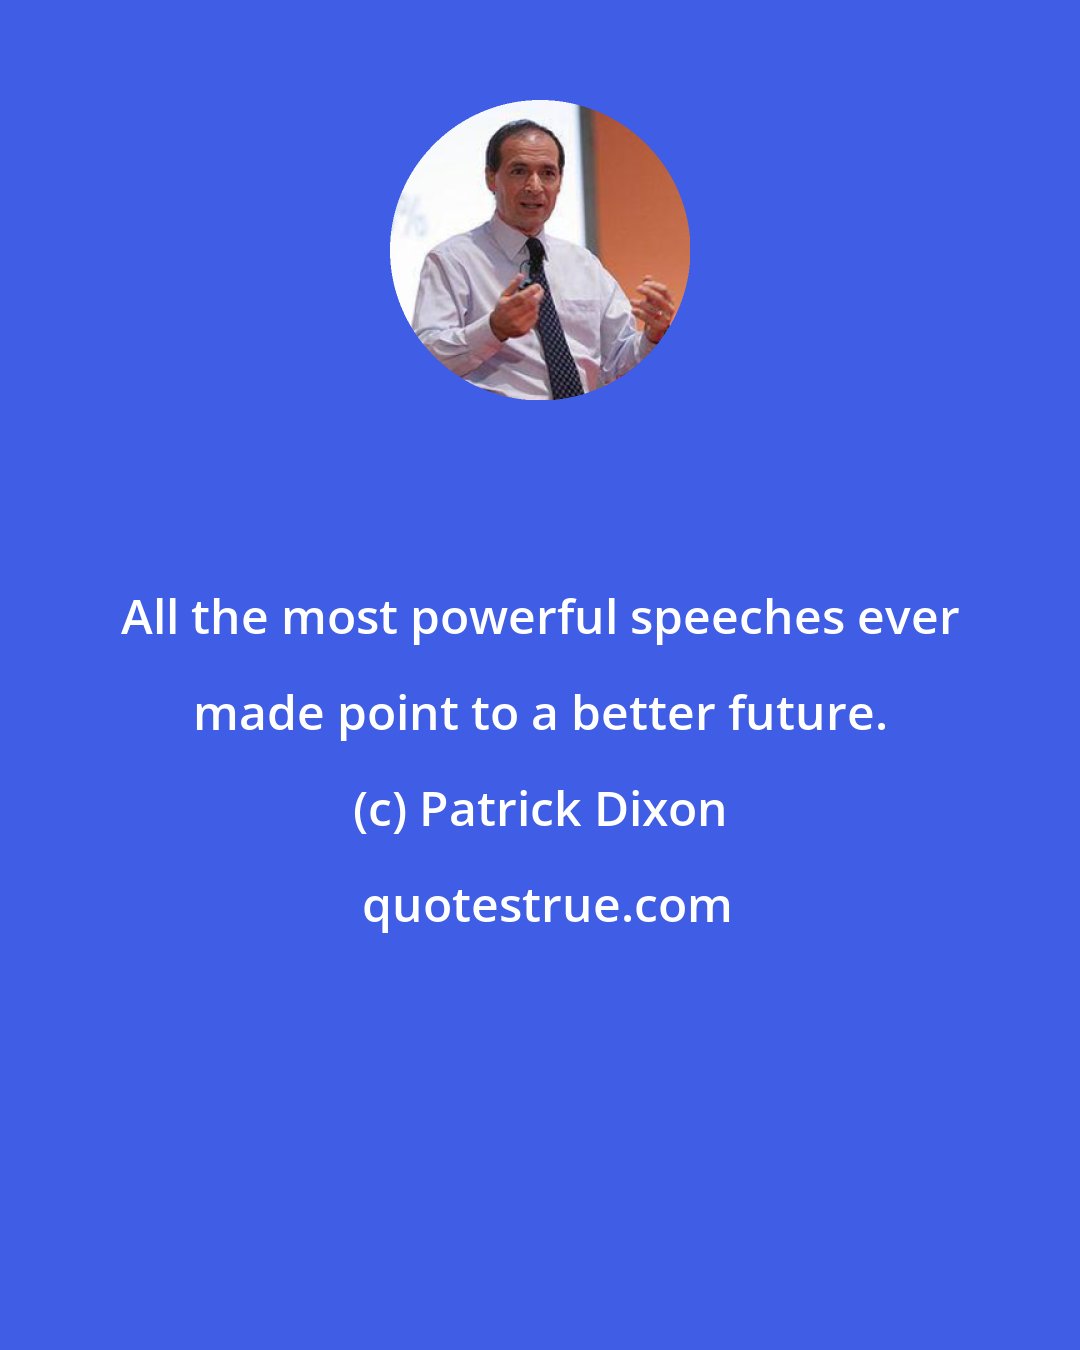 Patrick Dixon: All the most powerful speeches ever made point to a better future.